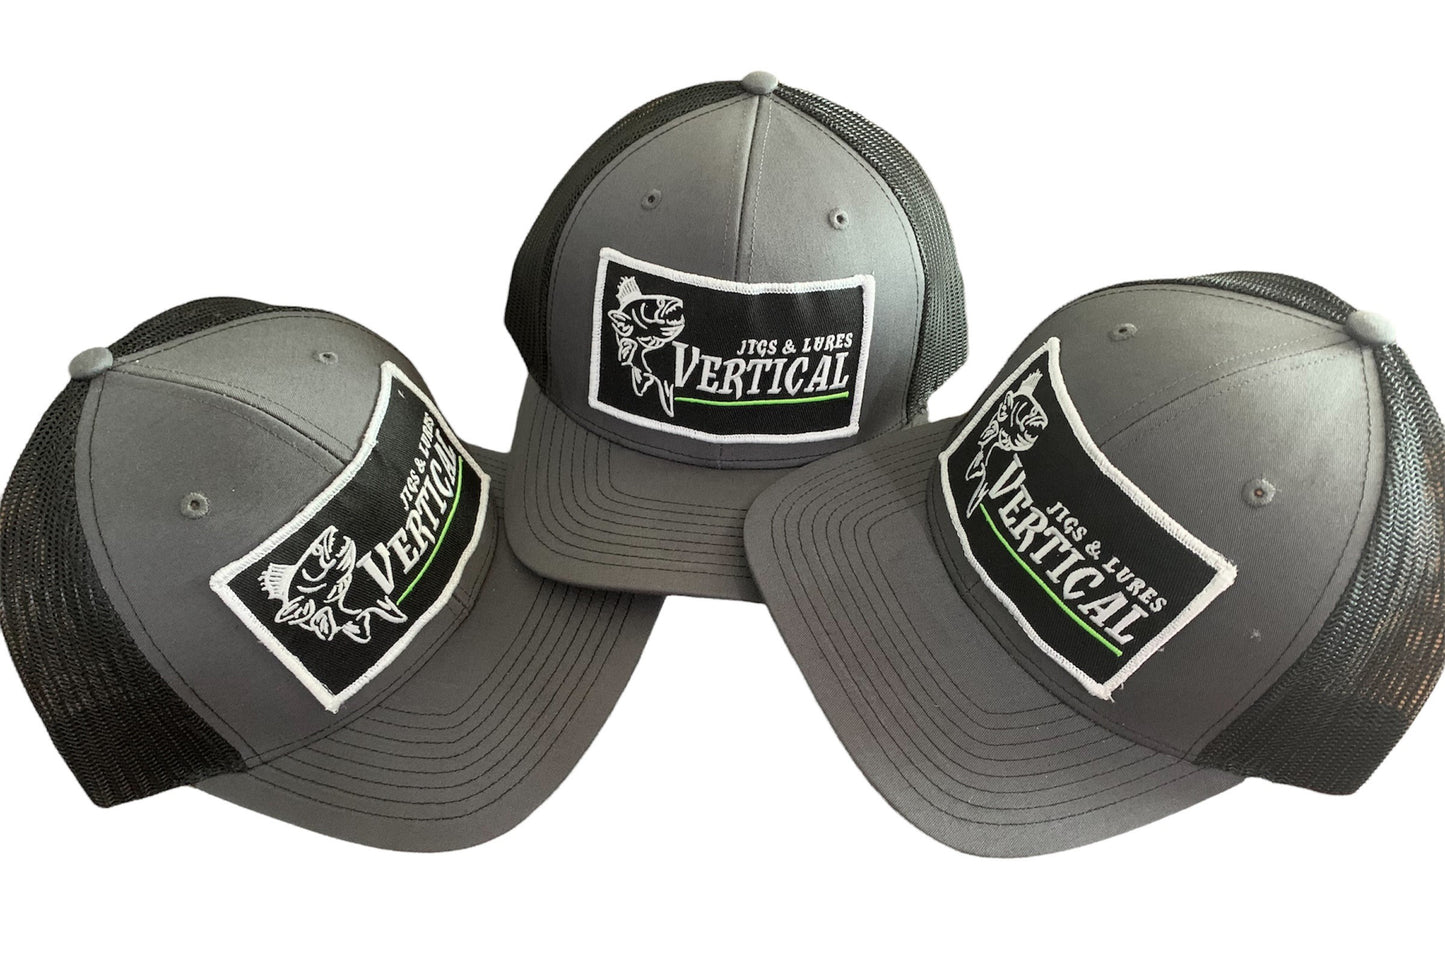 Vertical Jigs and Lures - Vertical Snapback Hats - Vertical Jigs and Lures Custom Hat